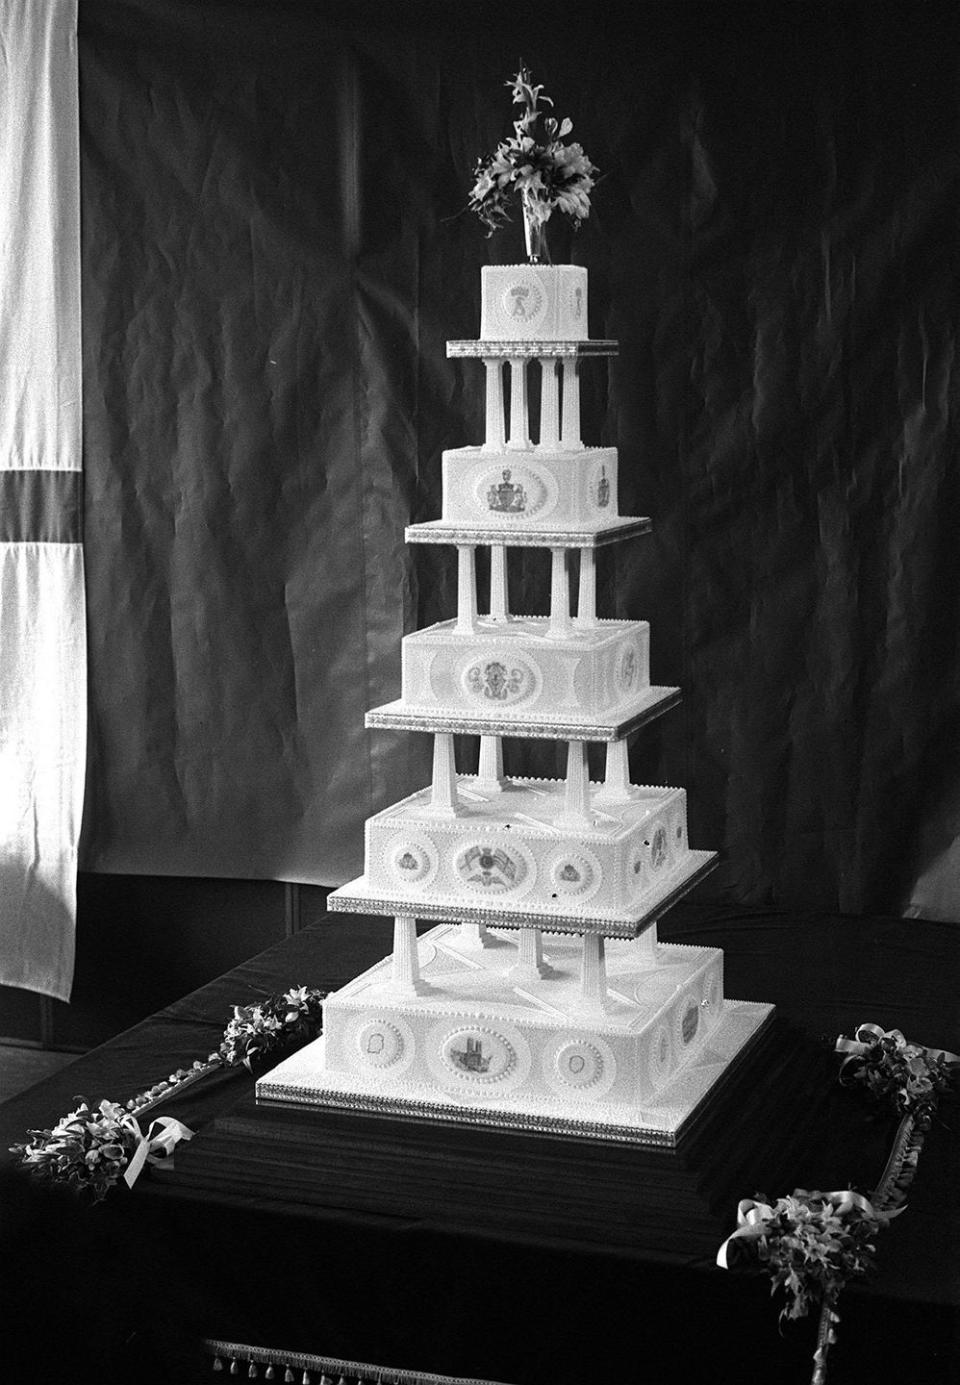 The towering cake